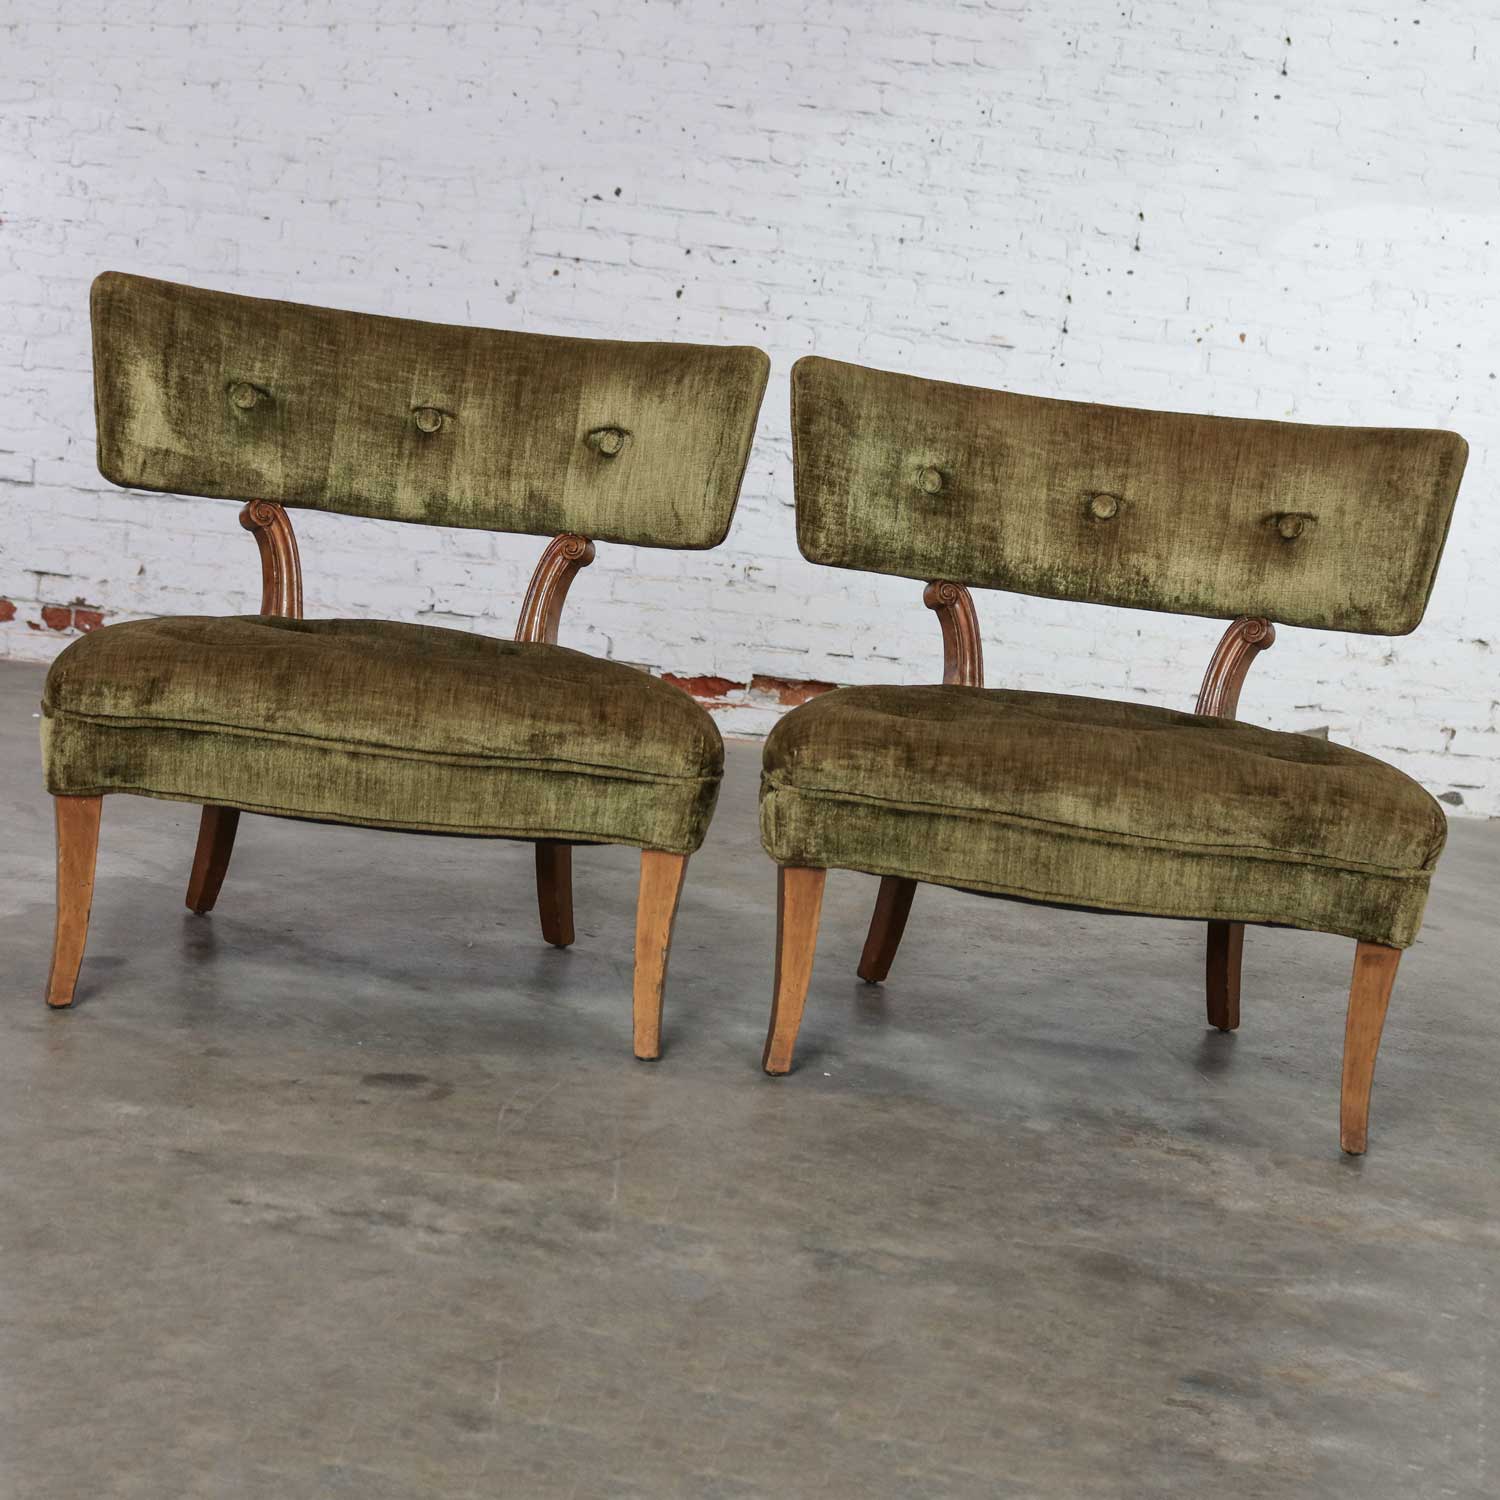 Hollywood Regency Pair of Slipper Chairs Style of Lorin Jackson for Grosfeld House